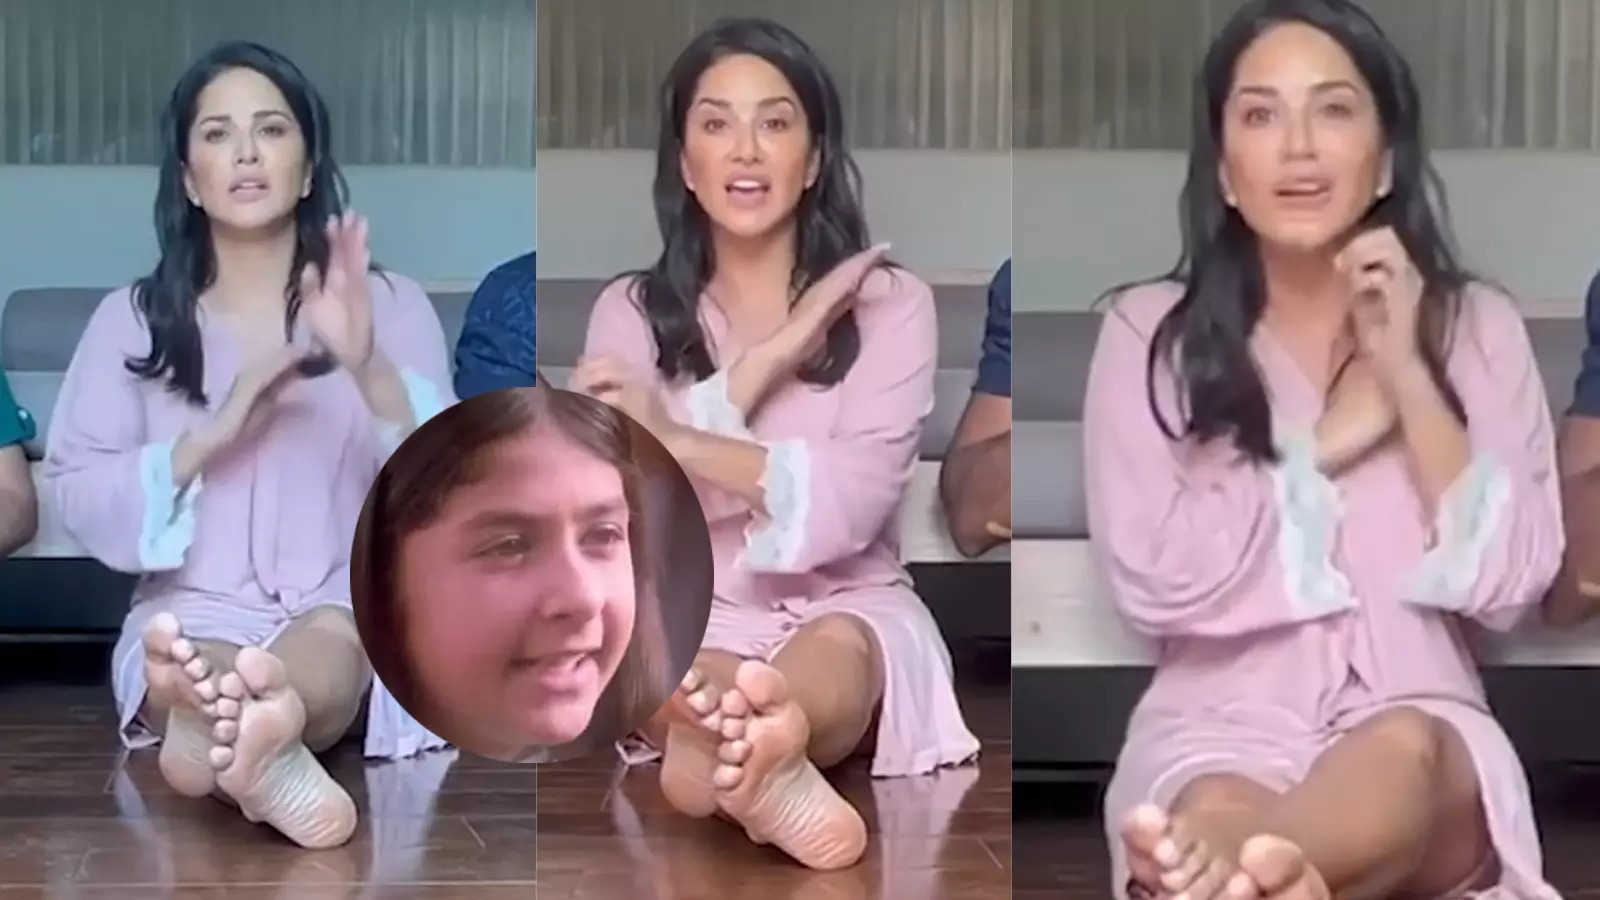 adrian andal recommends sunny leone feet pics pic